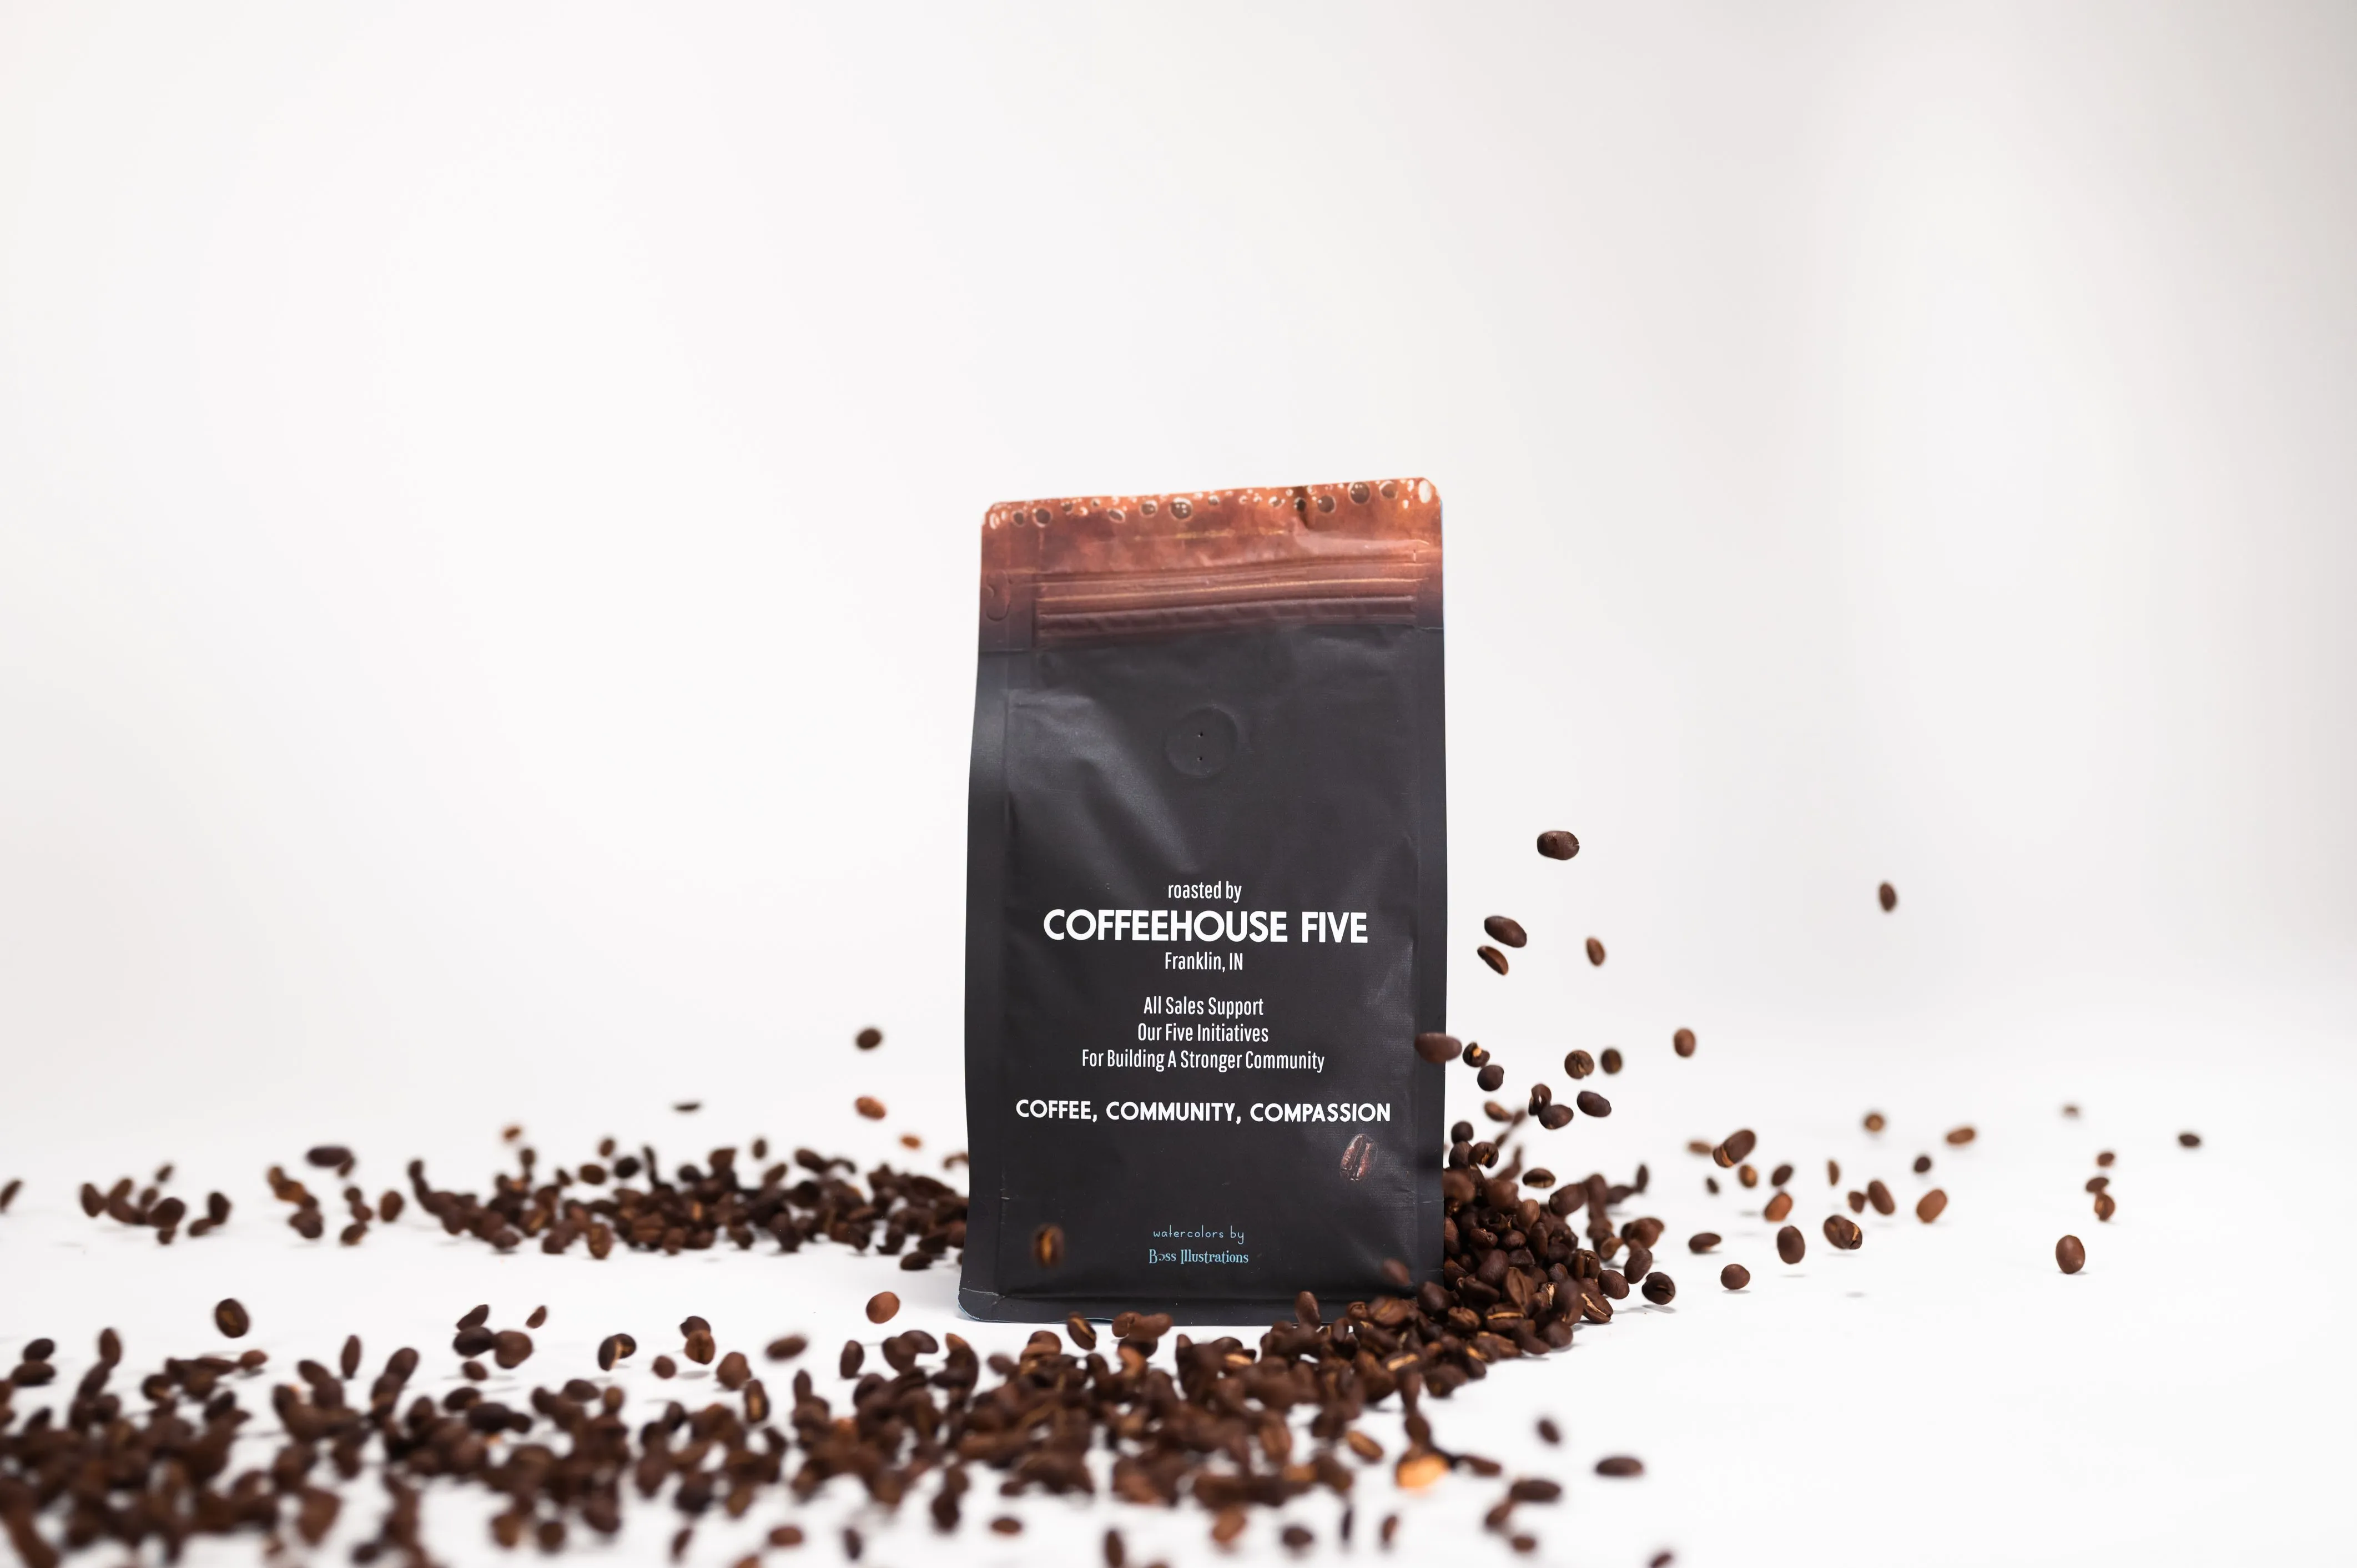 A package of Coffeehouse Five coffee surrounded by scattered coffee beans on a white background.